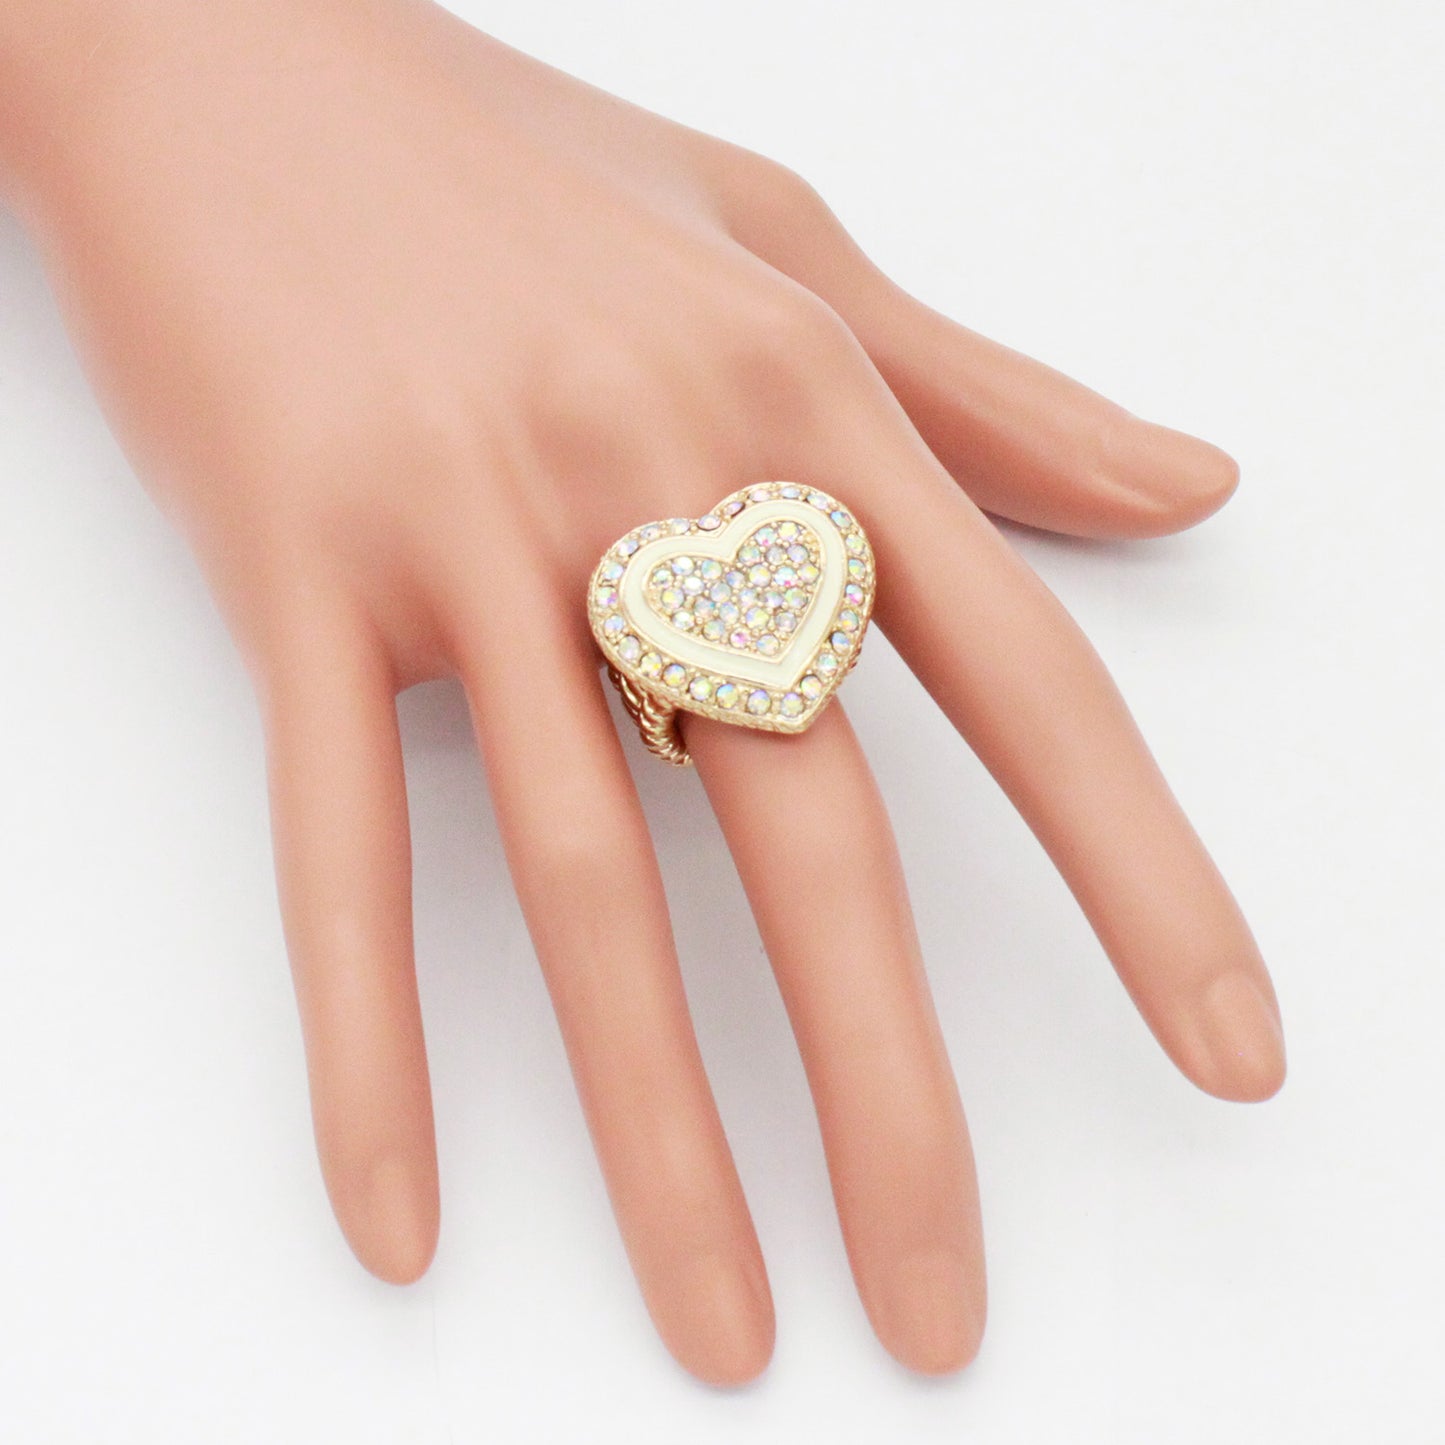 Lavencious Heart Shaped Rhinestones Stretch Rings for Women Size for 7-9(Gold AB)